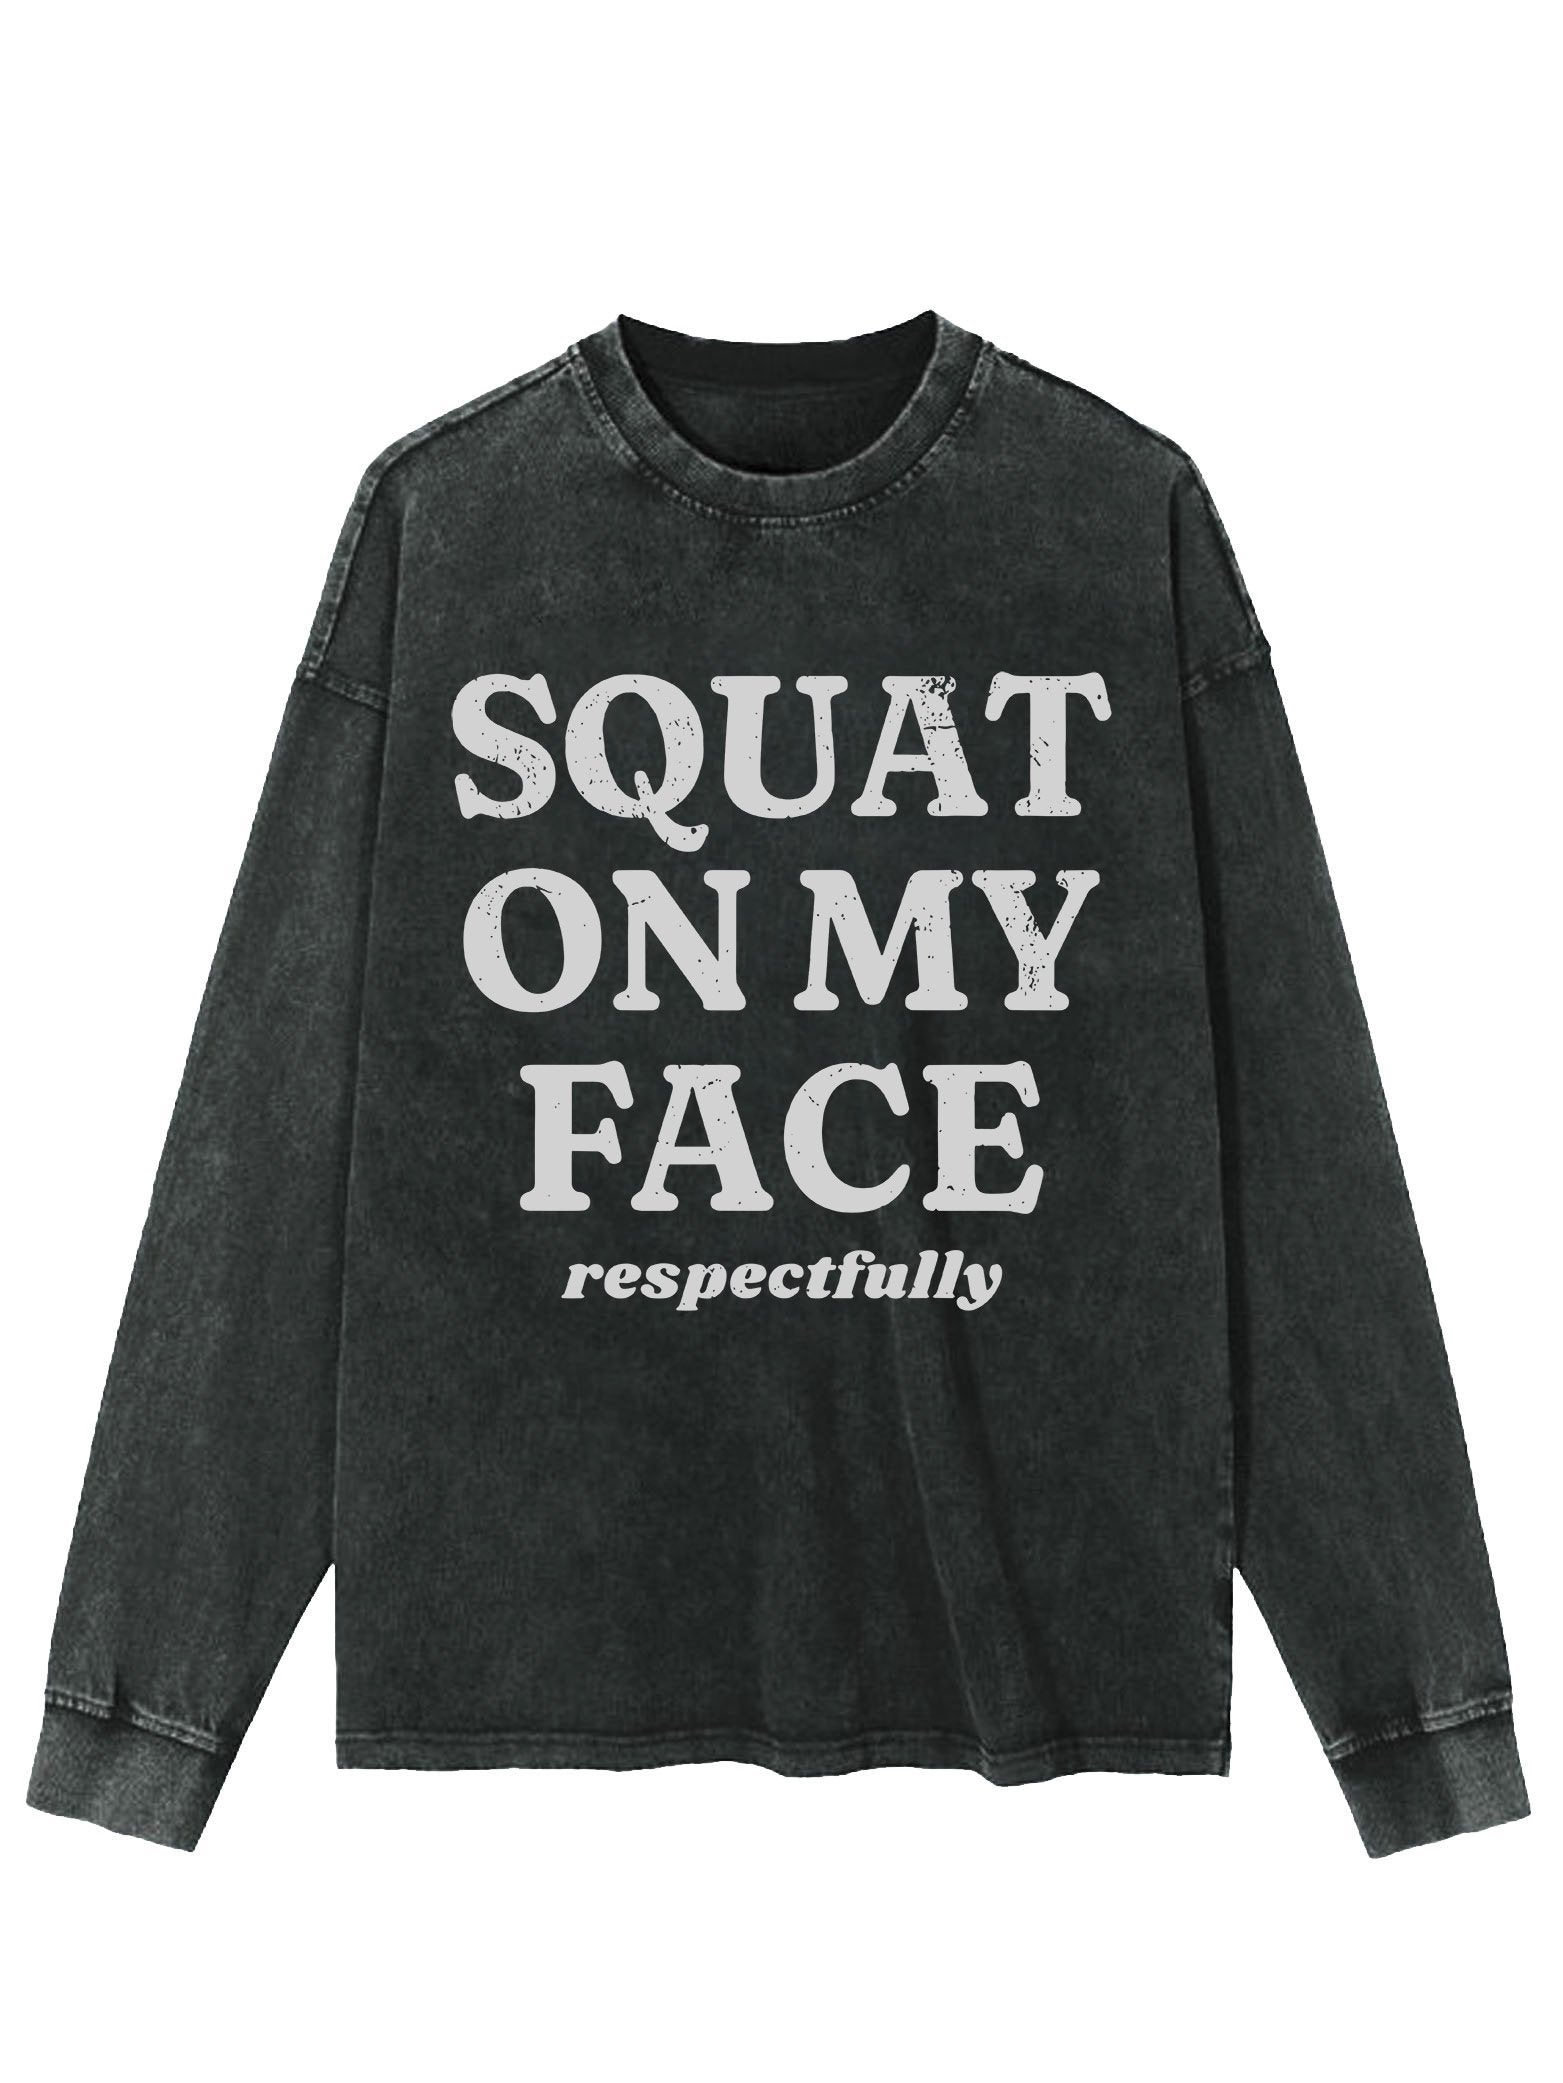 SQUAT ON MY FACE RESPECTFULLY Washed Long Sleeve Shirt